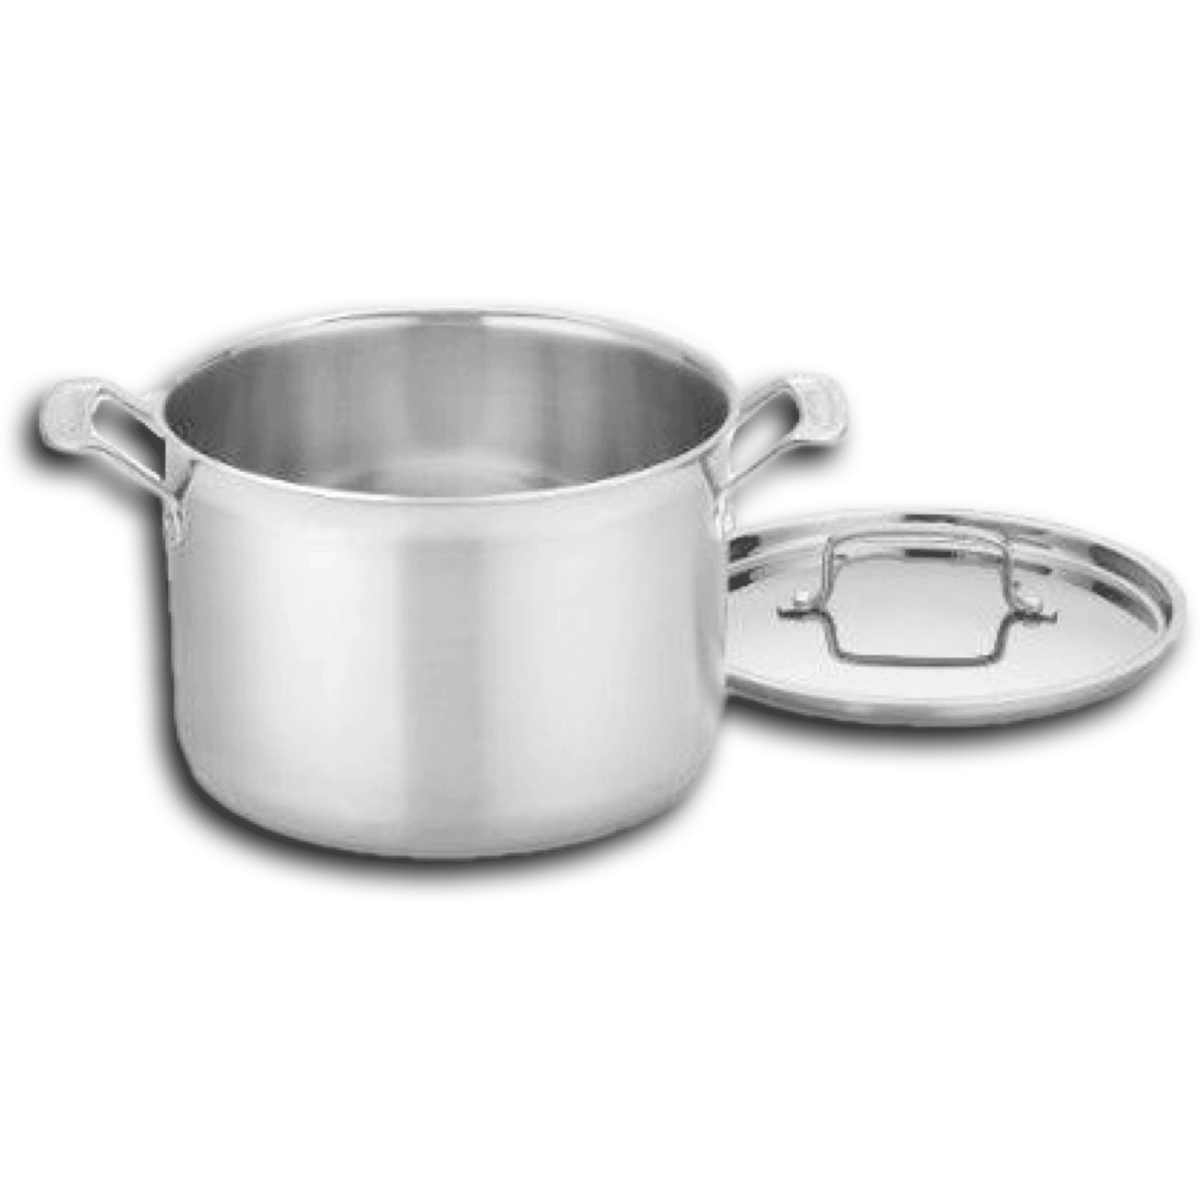 https://luxio.com/cdn/shop/files/cuisinart-multiclad-pro-stainless-8-quart-stockpot-with-cover-luxio-1_1200x1200.png?v=1690865807